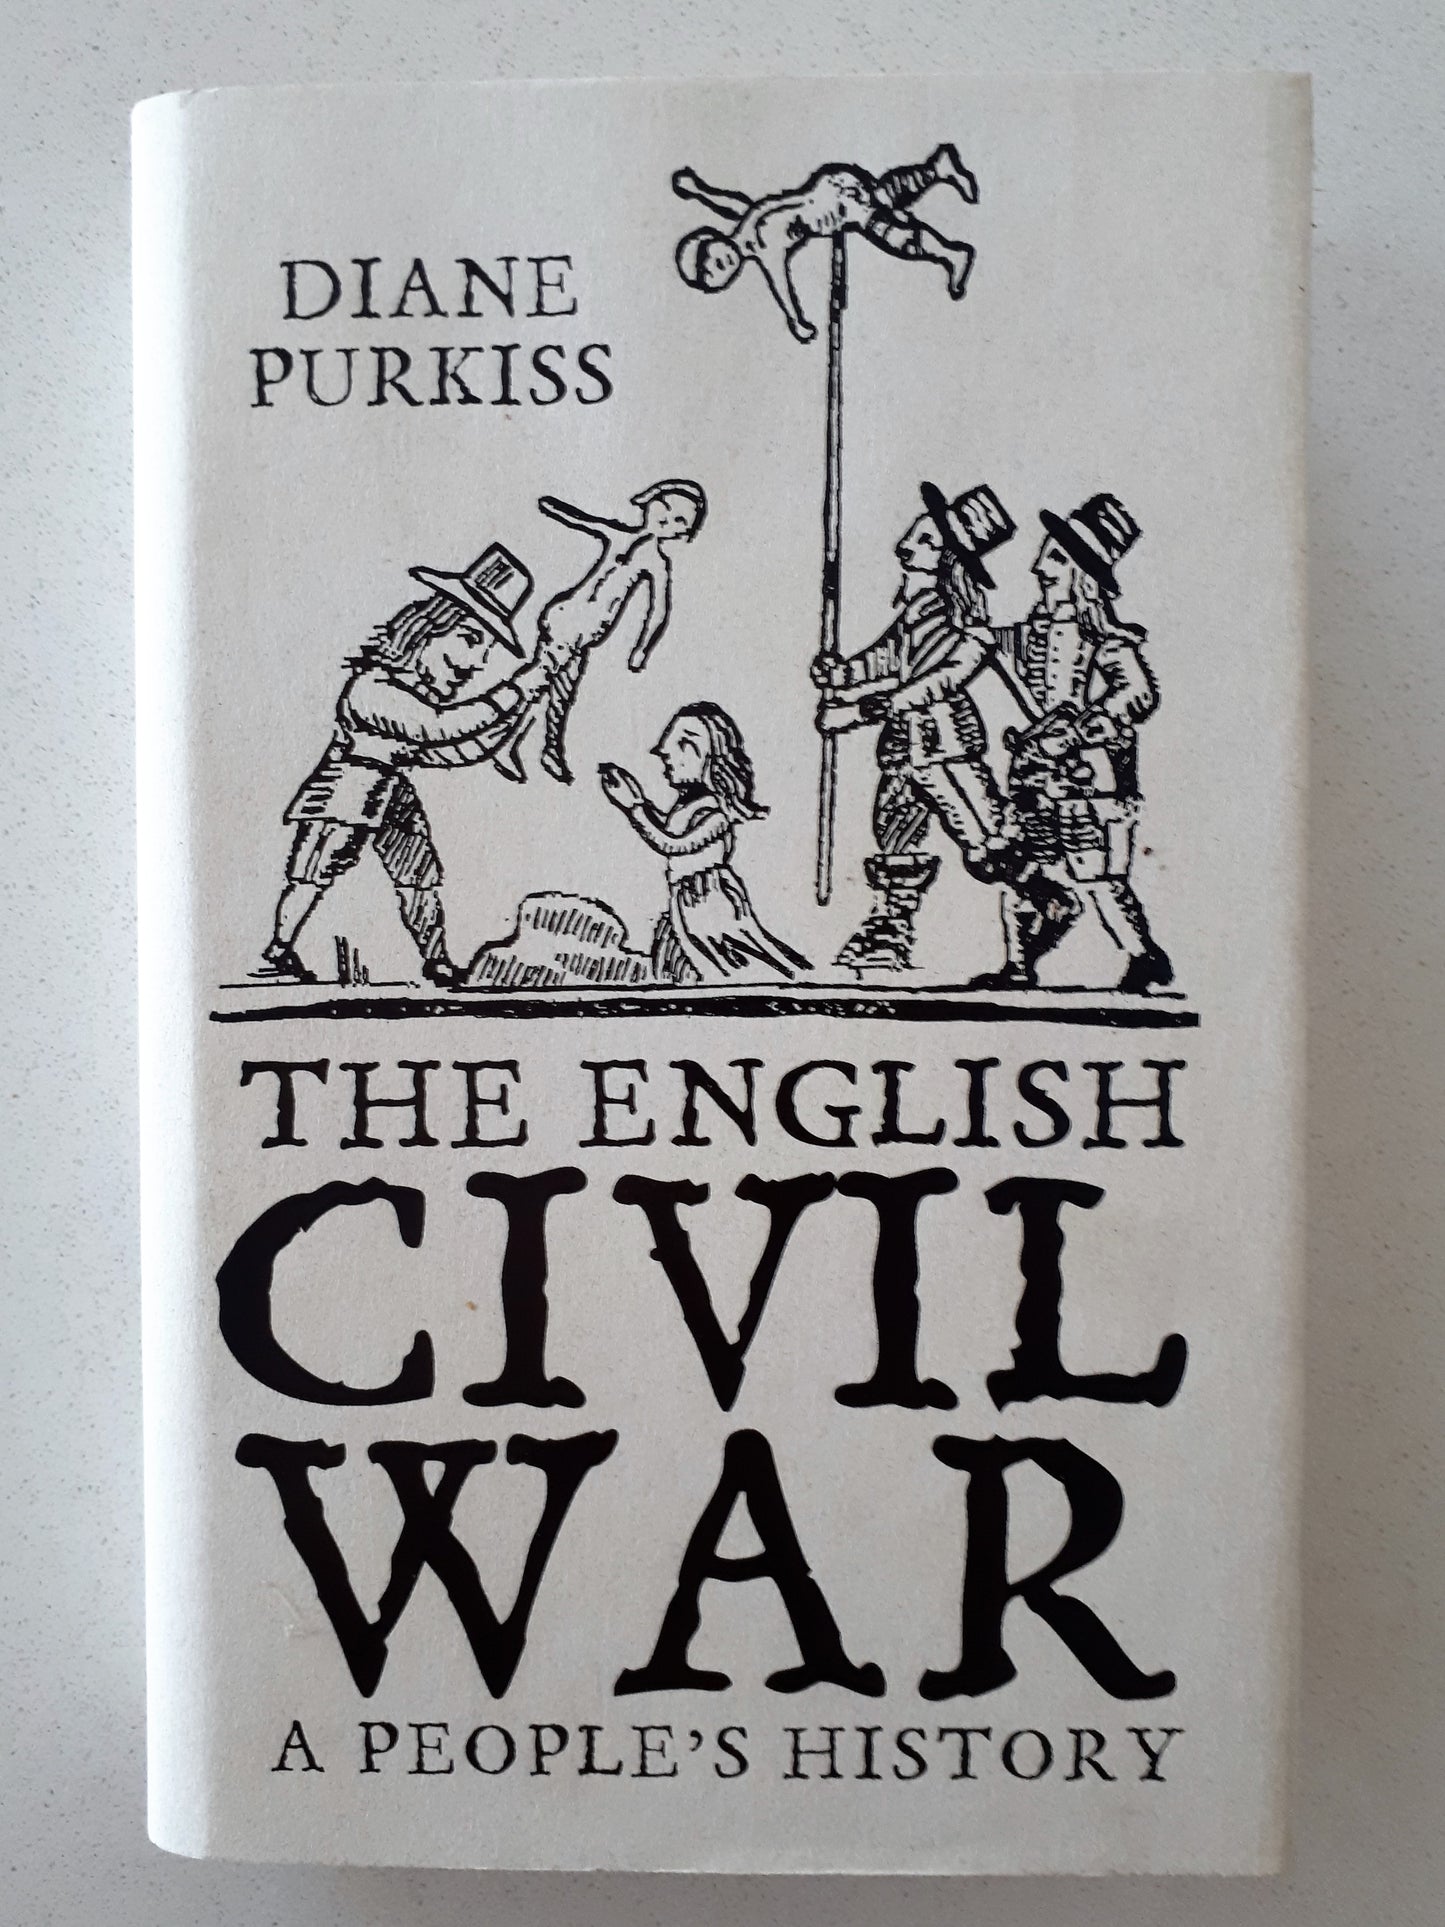 The English Civil War  A People's History  by Diane Purkiss